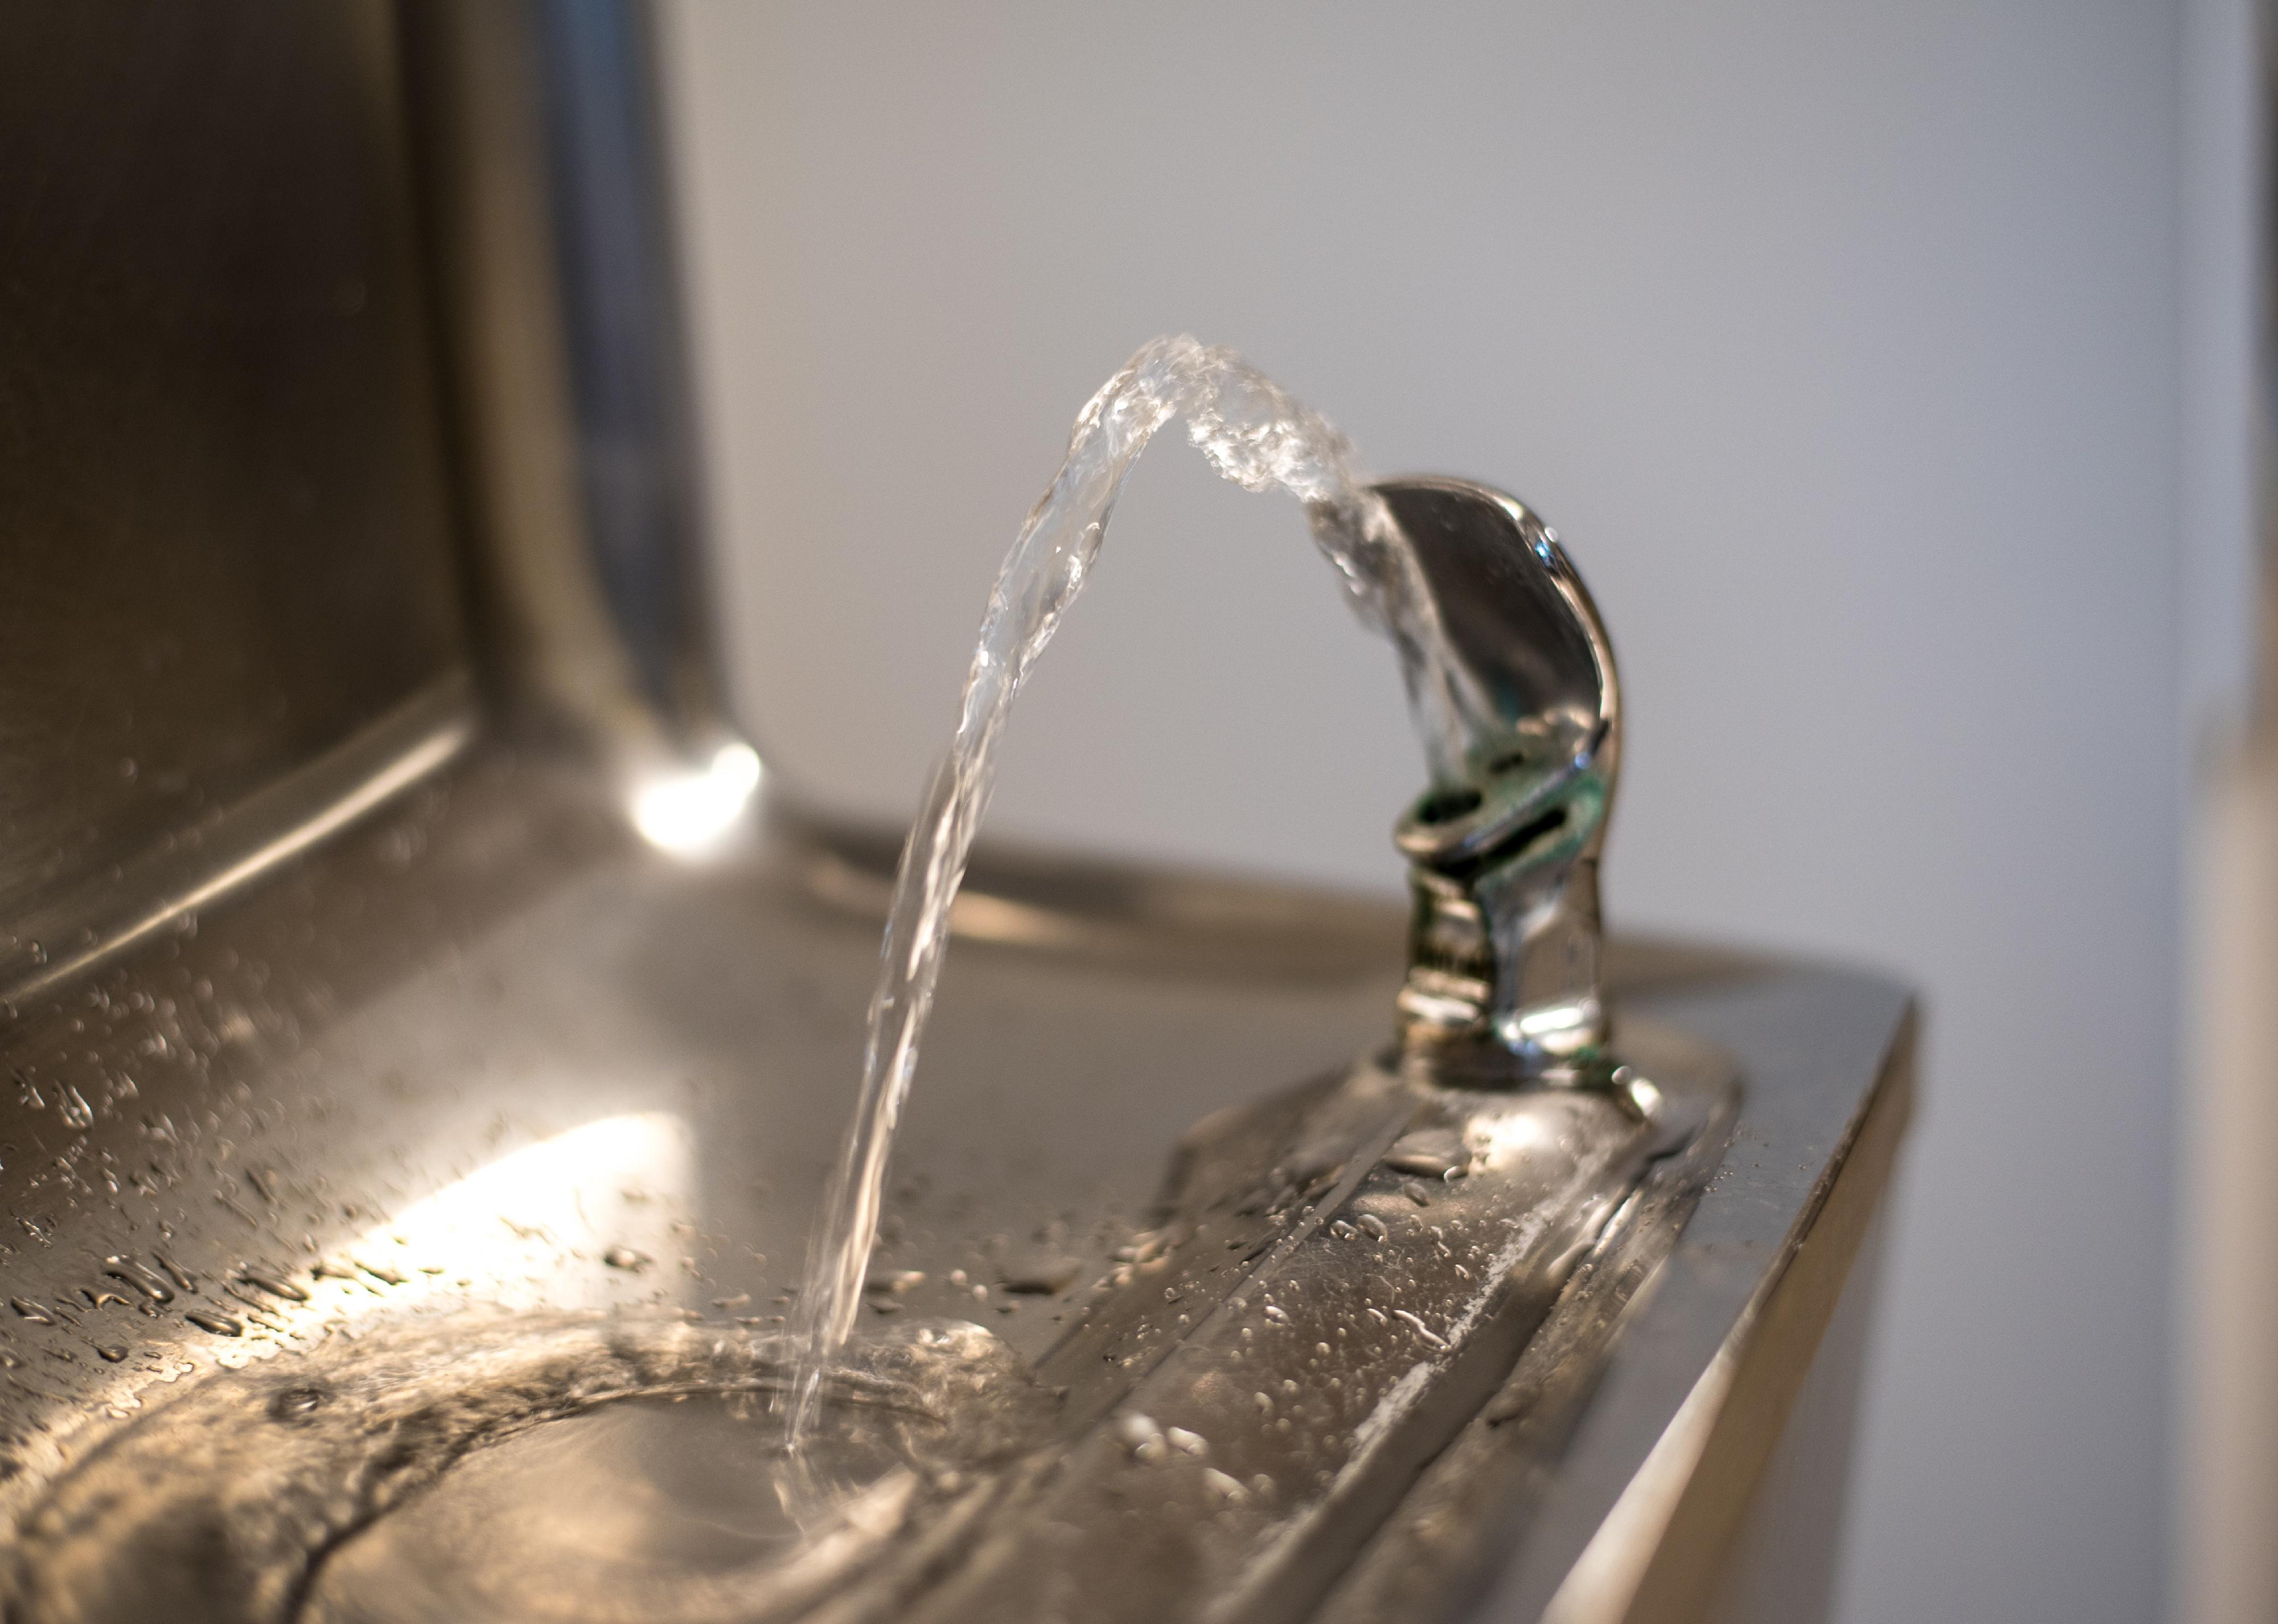 <p>Across Southern, Midwestern, and Northeastern states, it's a <a href="https://www.farmersalmanac.com/10-common-items-with-different-names-23742">water fountain</a>; in the Western states, it's a drinking fountain; and in Rhode Island, Massachusetts, and parts of Wisconsin, it's a "bubbler," a term first used in Milwaukee newspapers in the early 20th century. It is thought to have spread in popularity in part because of <a href="https://www.jsonline.com/story/life/green-sheet/2020/02/25/why-bubbler-what-water-drinking-fountain-called-wisconsin-milwaukee/4793730002/">marketing materials from the Kohler Company</a>, which manufactured a bubbling valve to provide a continuous flow of water for drinking.</p>